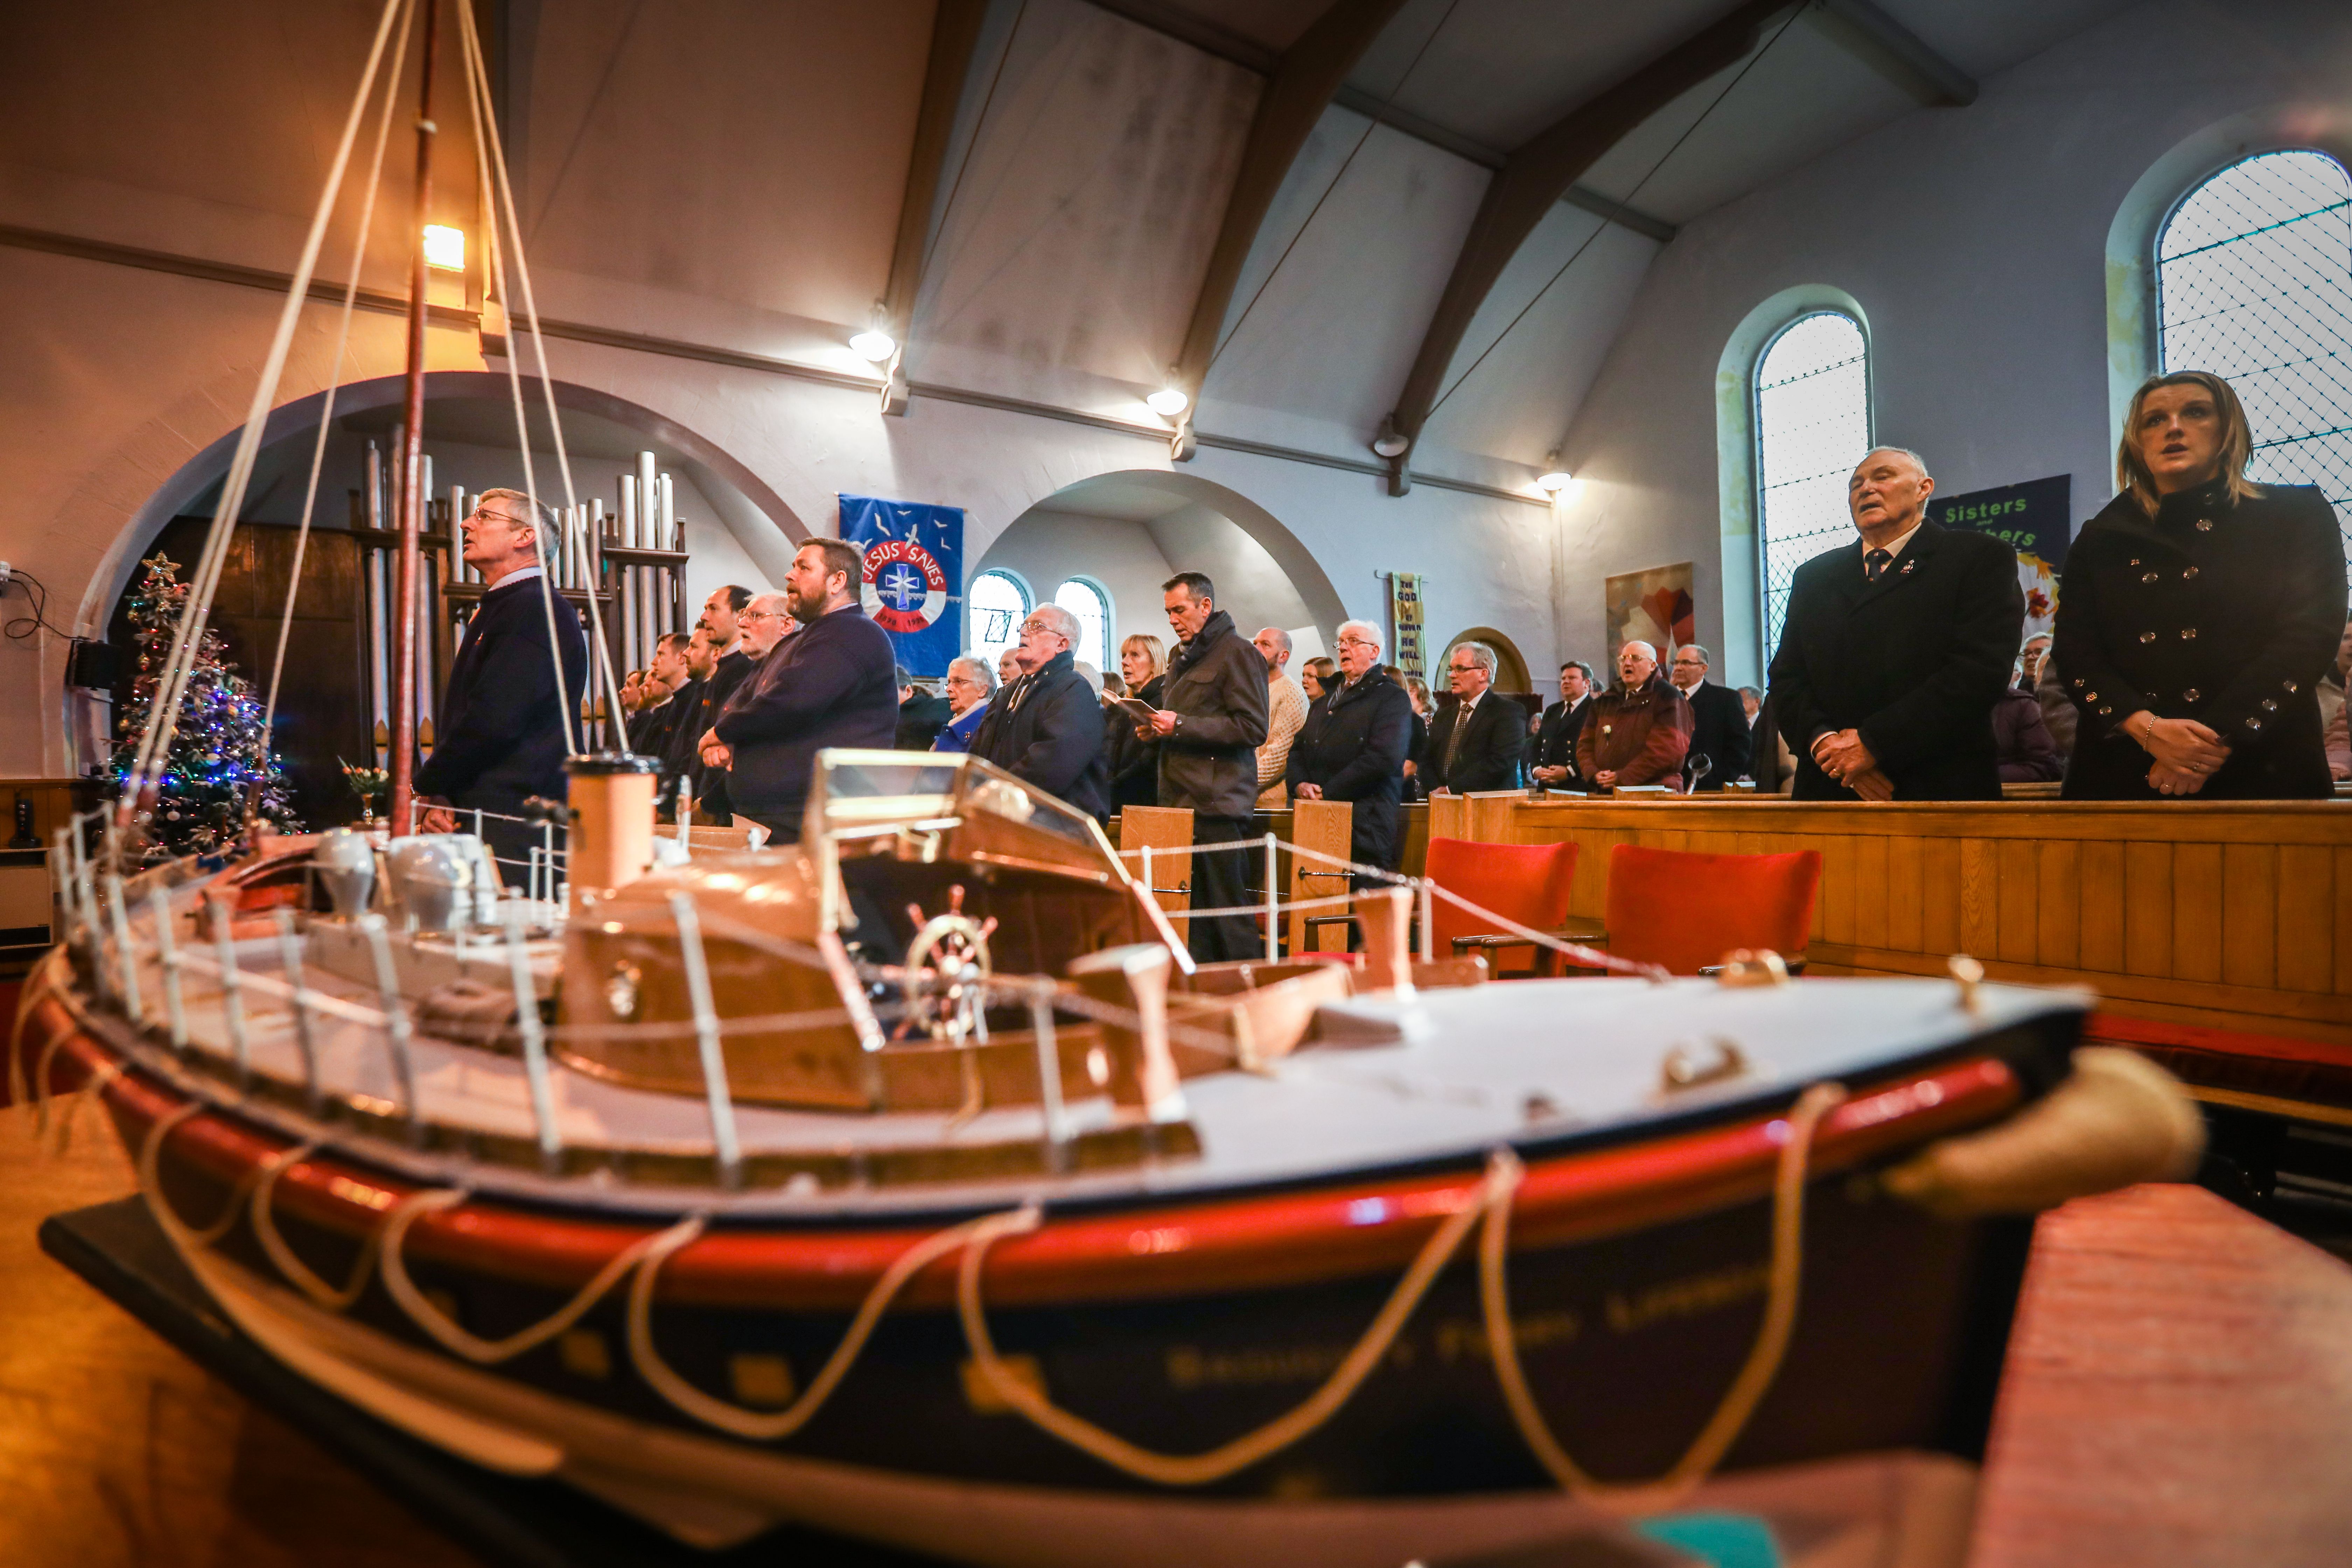 Members of the RNLI squad in the front rows of the church with a model of the Mona Lifeboat